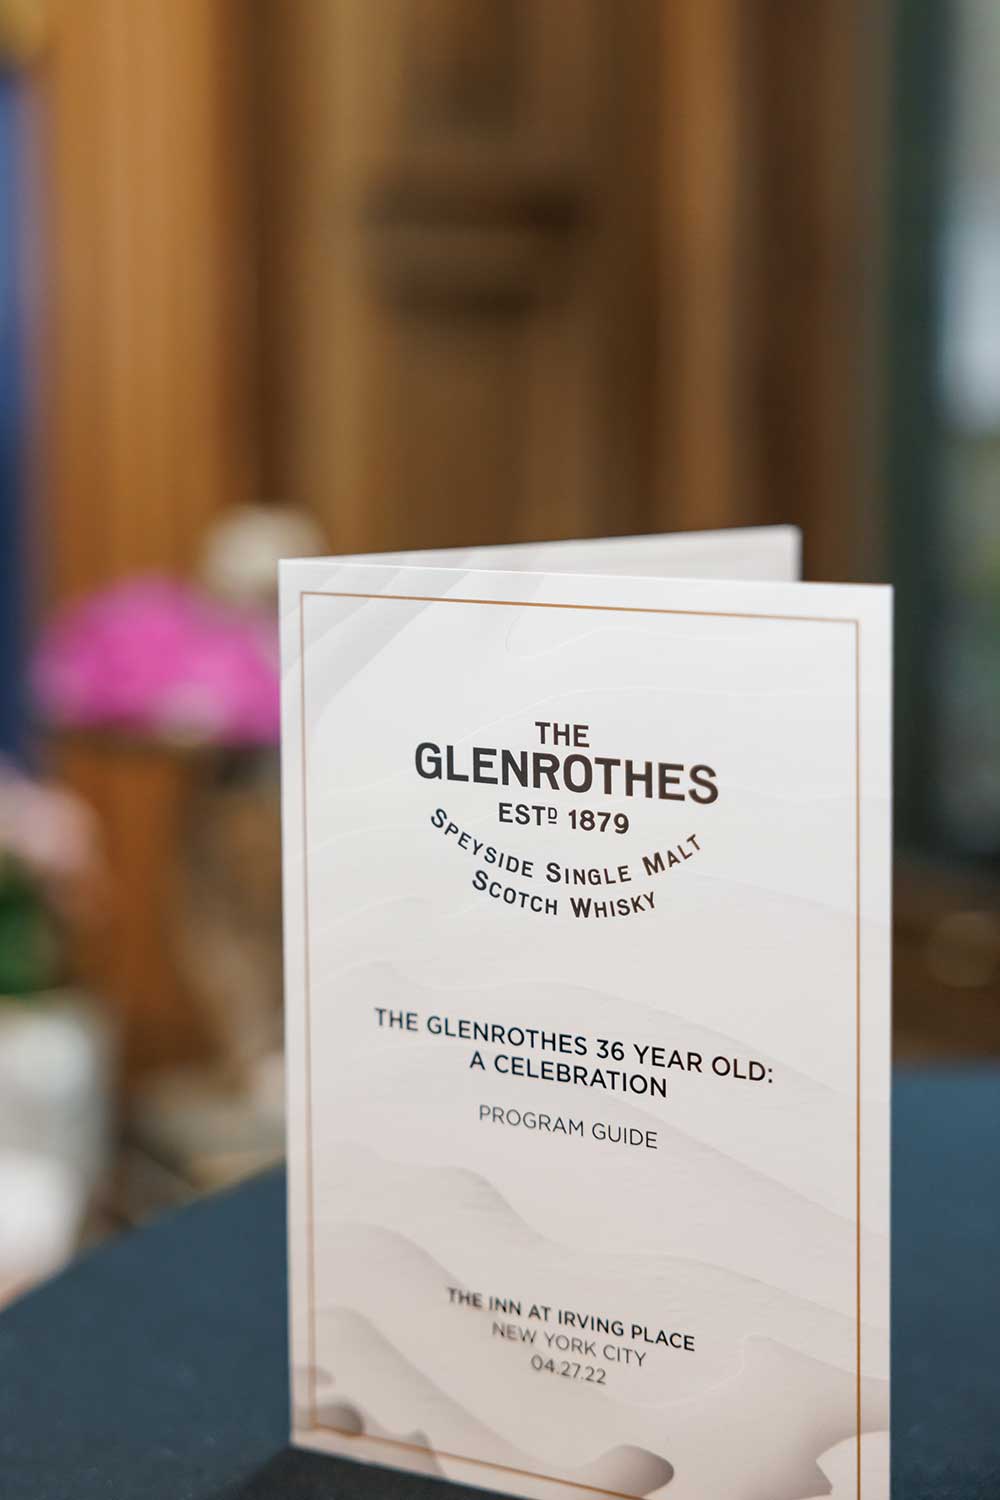 The program of the glenrothes 36 release event